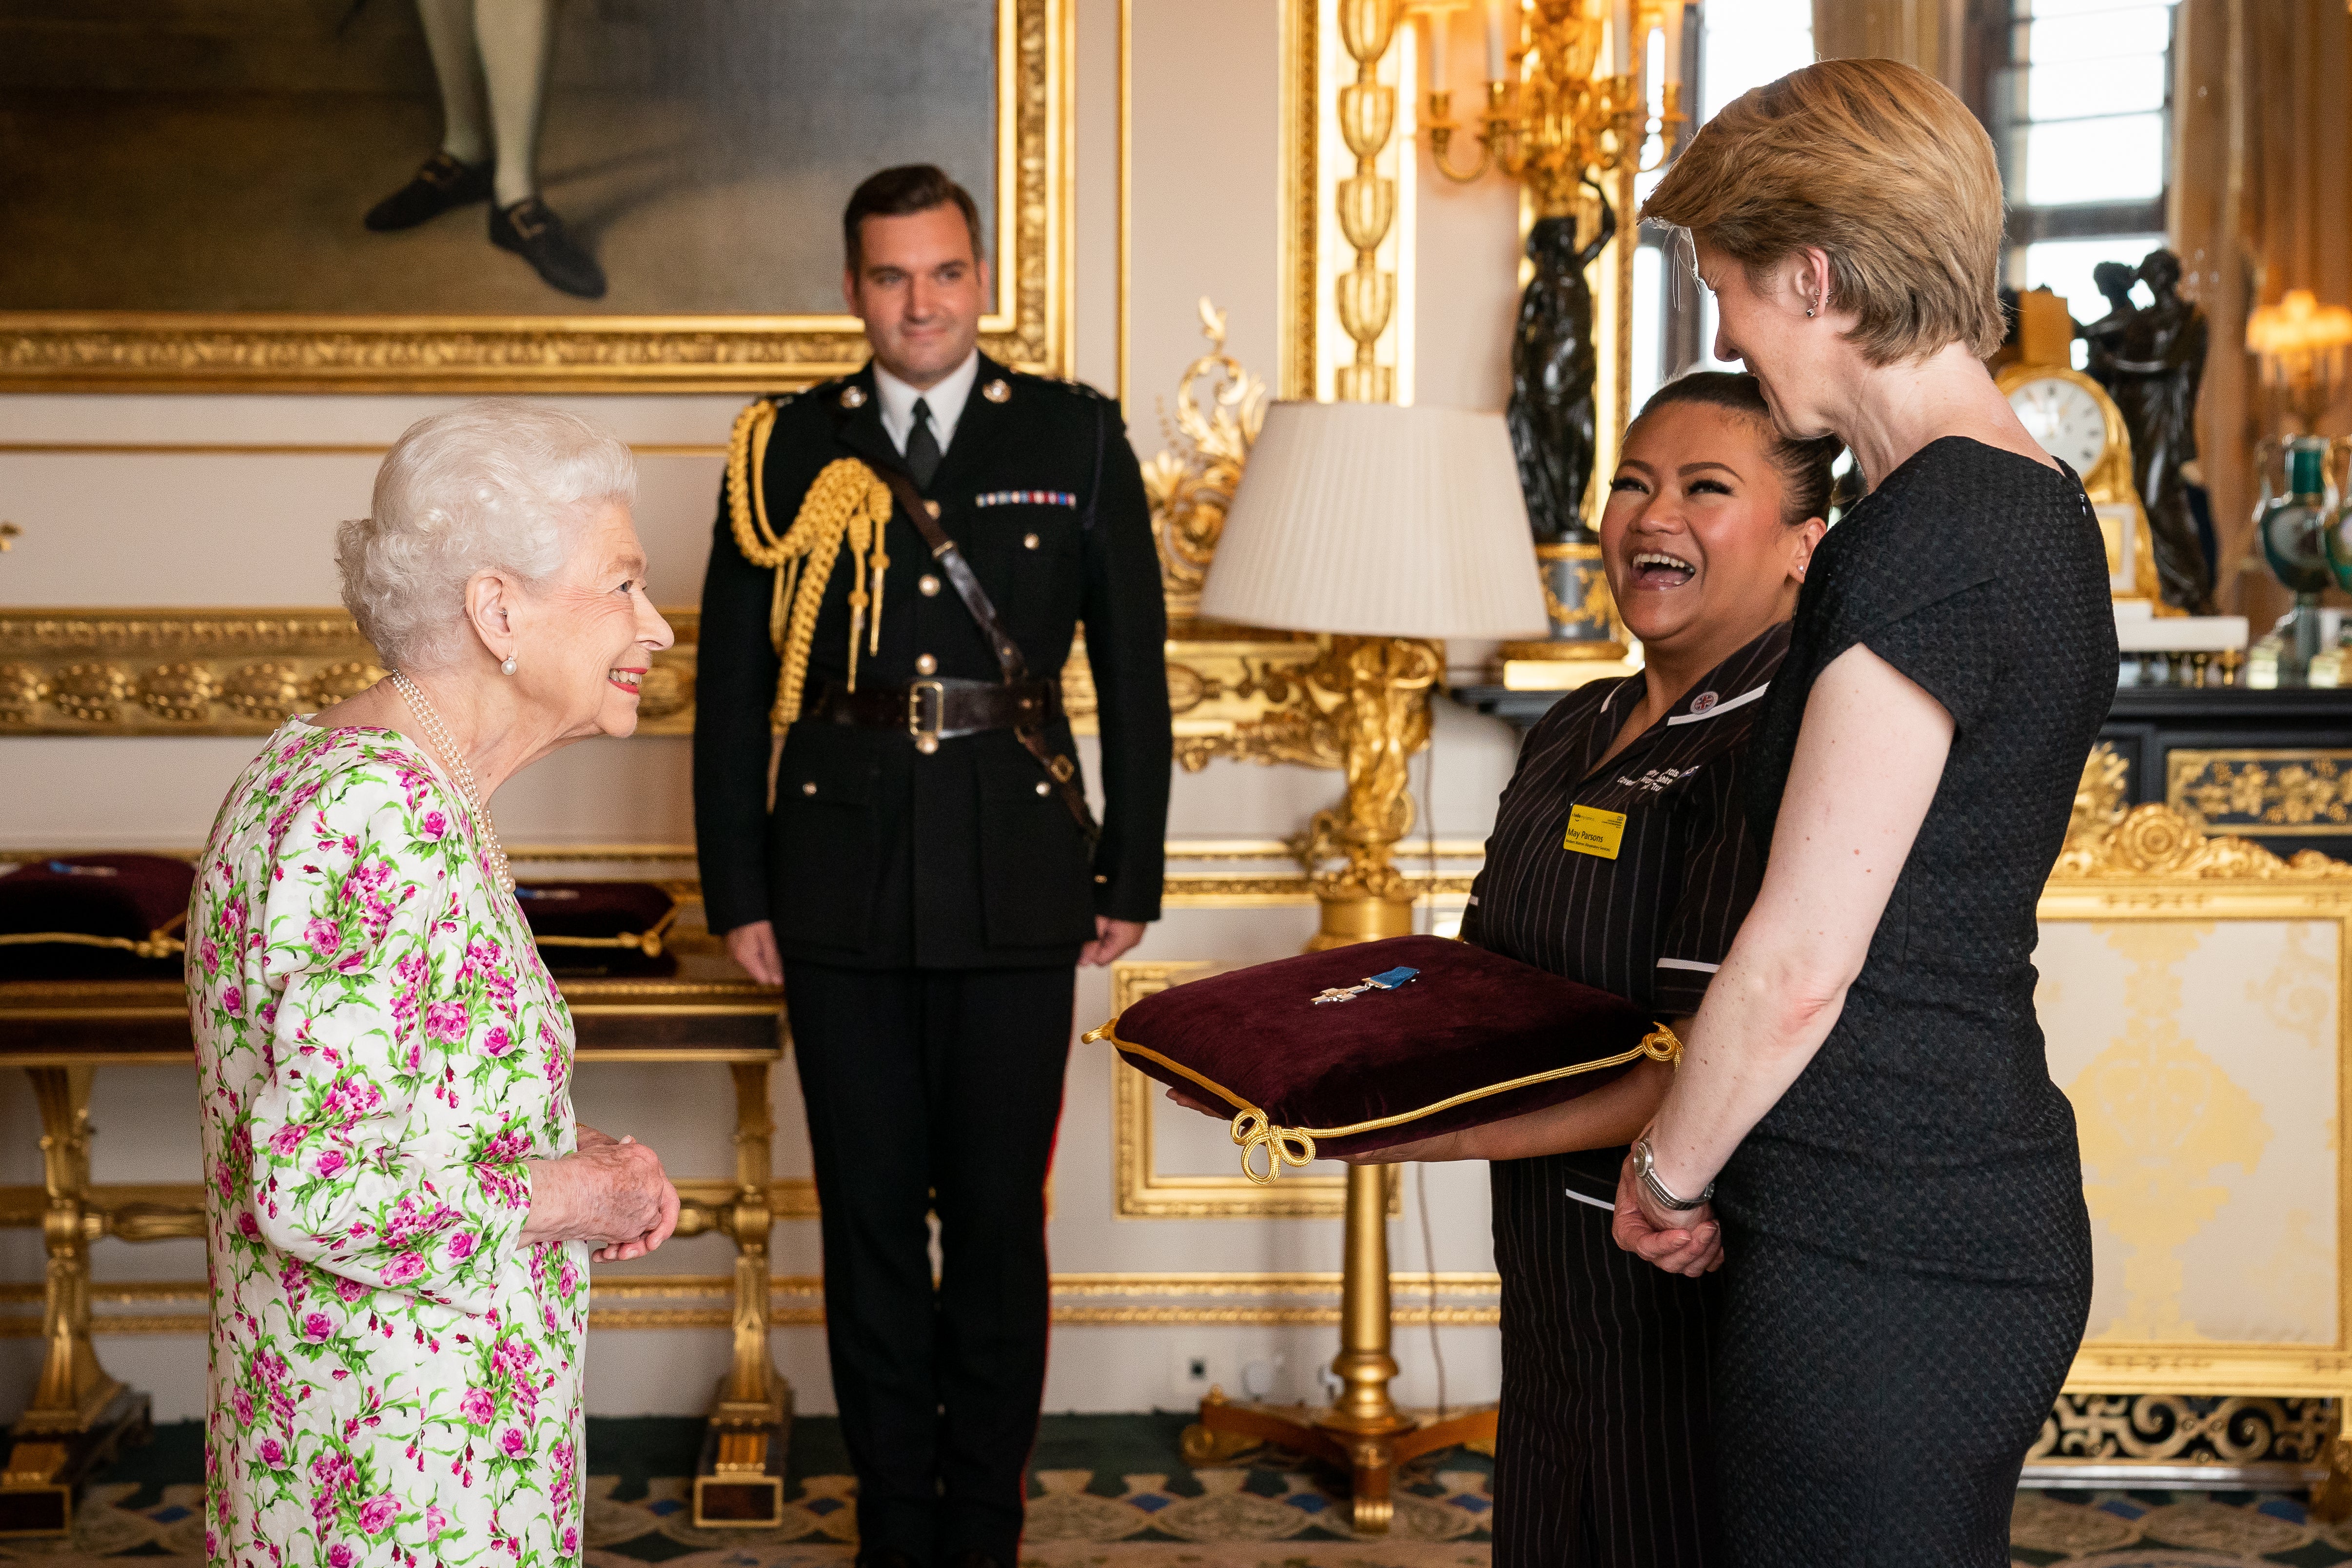 The Queen presenting the George Cross to Amanda Pritchard, chief executive of NHS England, and May Parsons, modern matron at University Hospital Coventry and Warkwickshire, representatives of the NHS, during an audience at Windsor Castle, in July (Aaron Chown/PA)